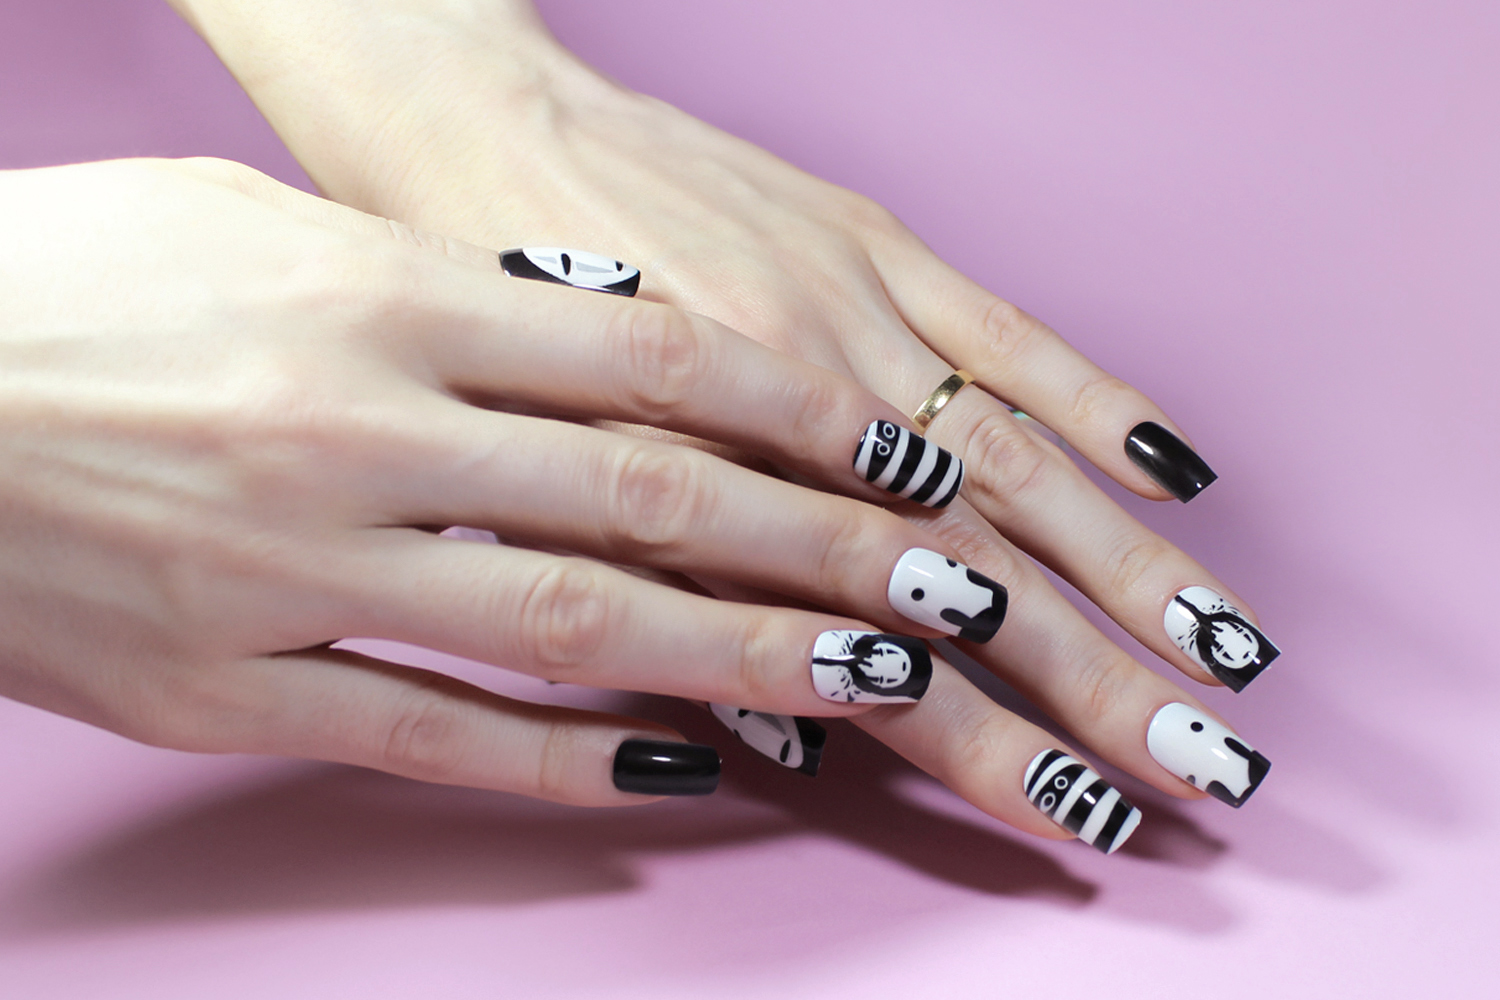 blogger Liz Breygel demonstrates Spirited Away inspired nail look with press-on nails by Glamermaid